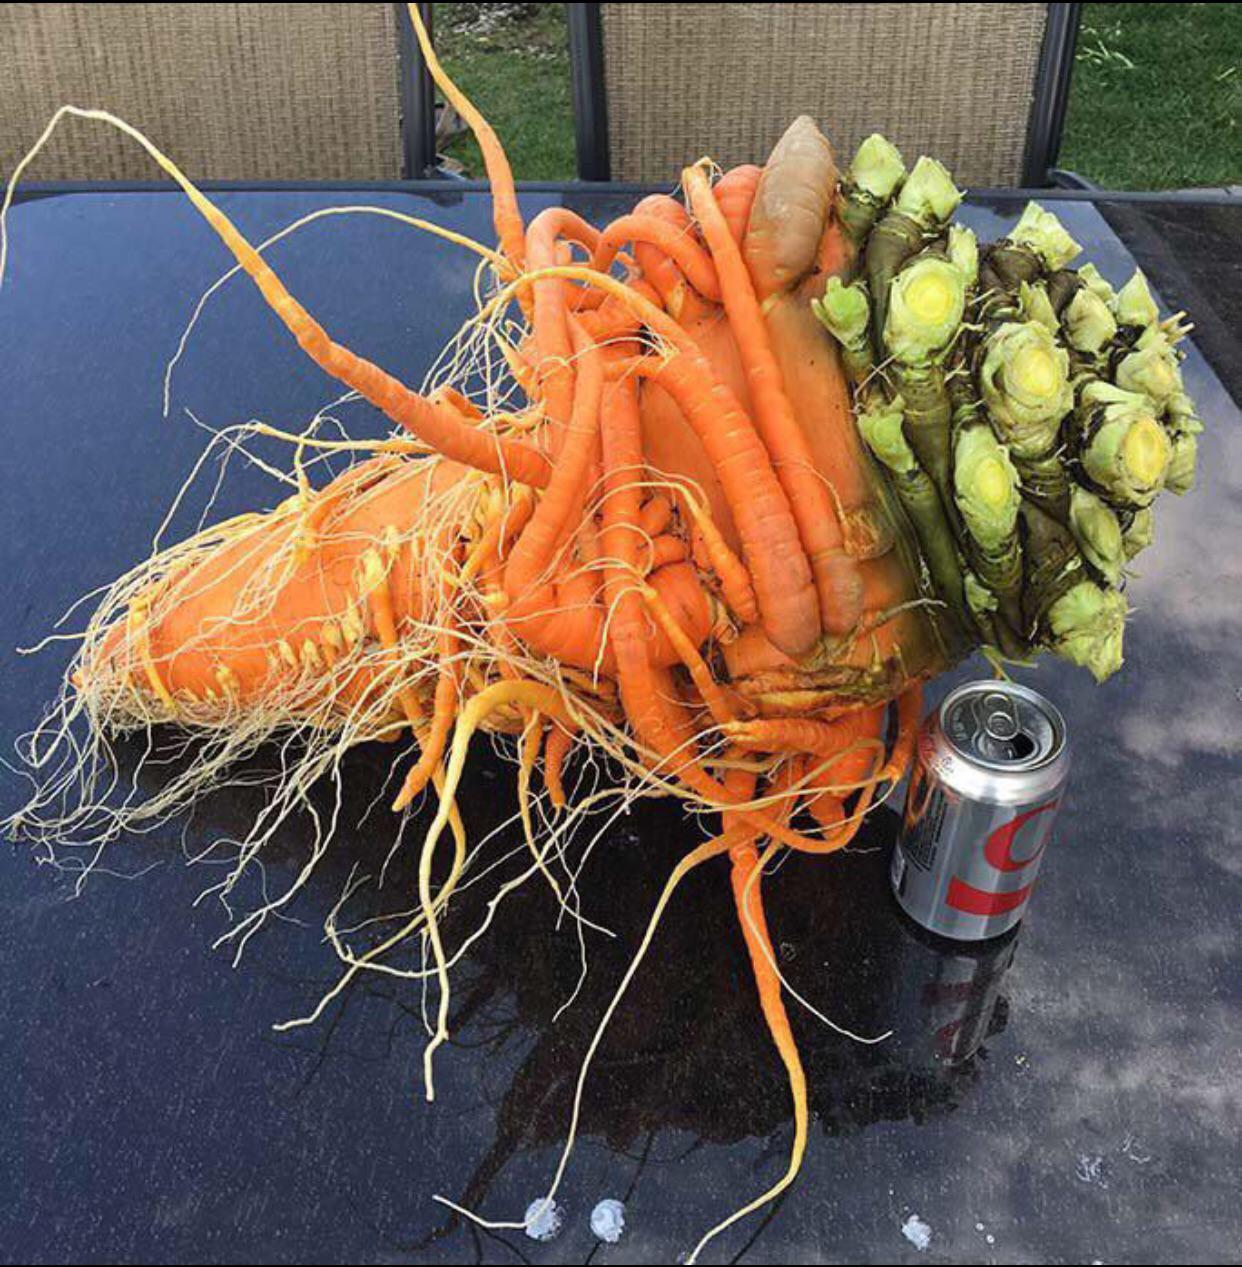 I think Michurin would have some questions) - Carrot, Vegetables, Weaving, Root crop